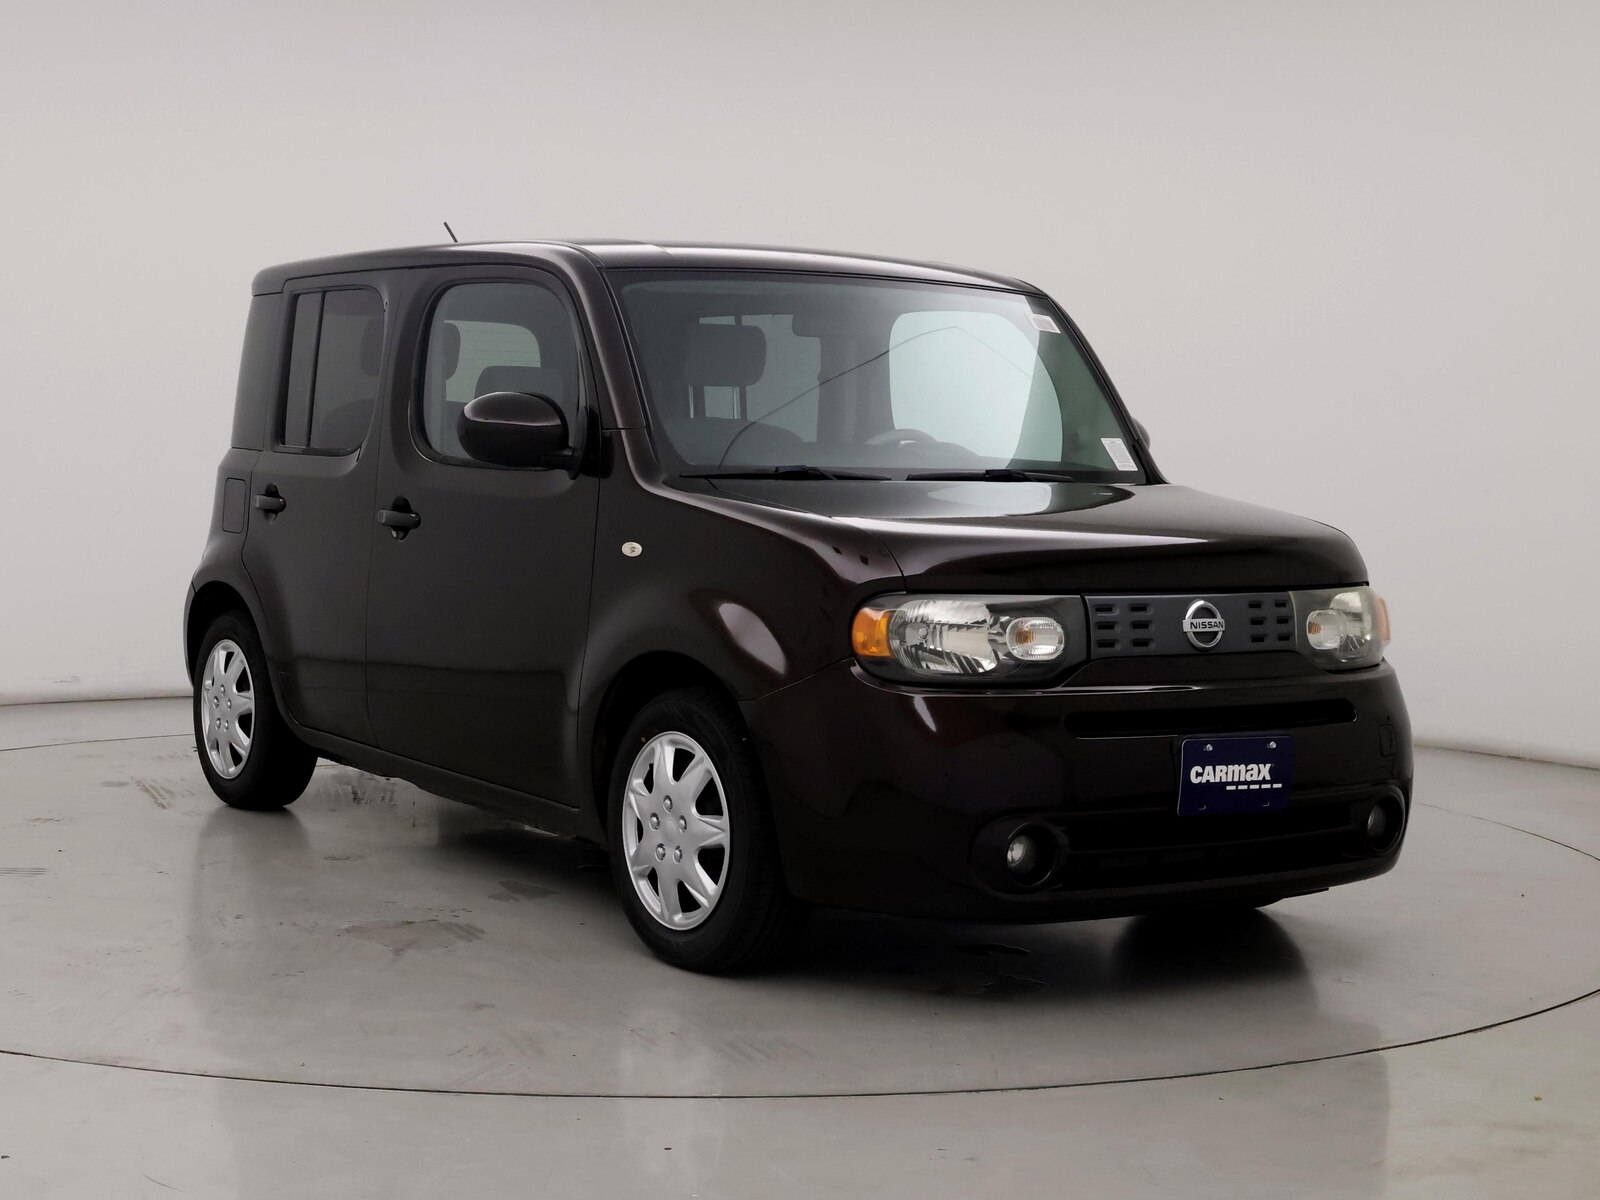 Used 2013 Nissan cube S with VIN JN8AZ2KR7DT303898 for sale in Kenosha, WI